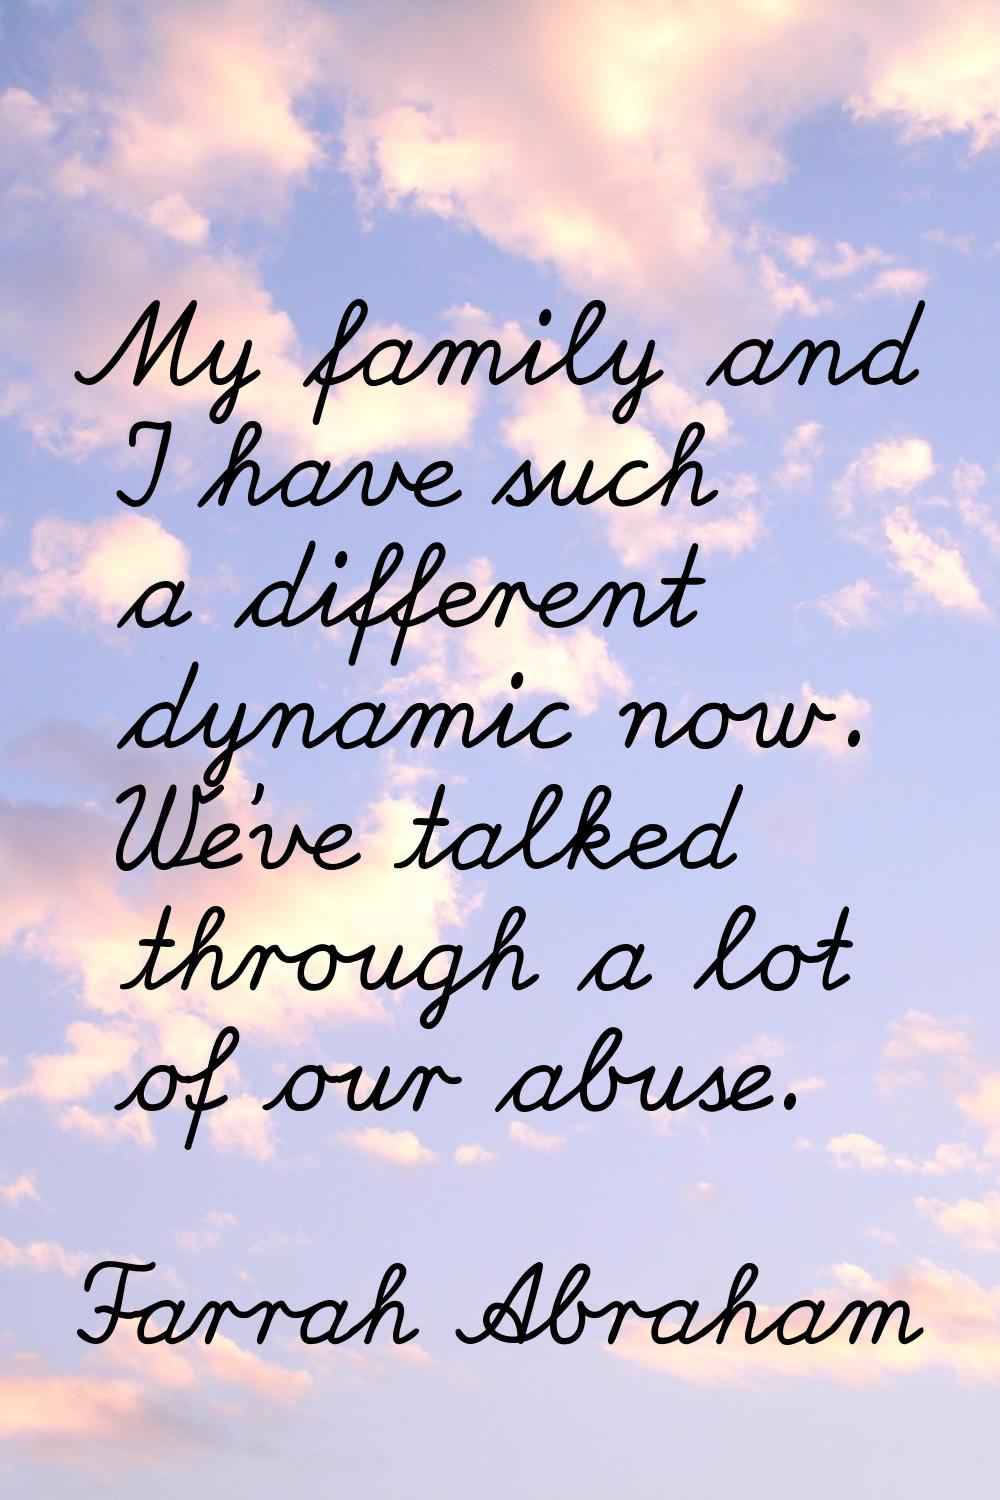 My family and I have such a different dynamic now. We've talked through a lot of our abuse.